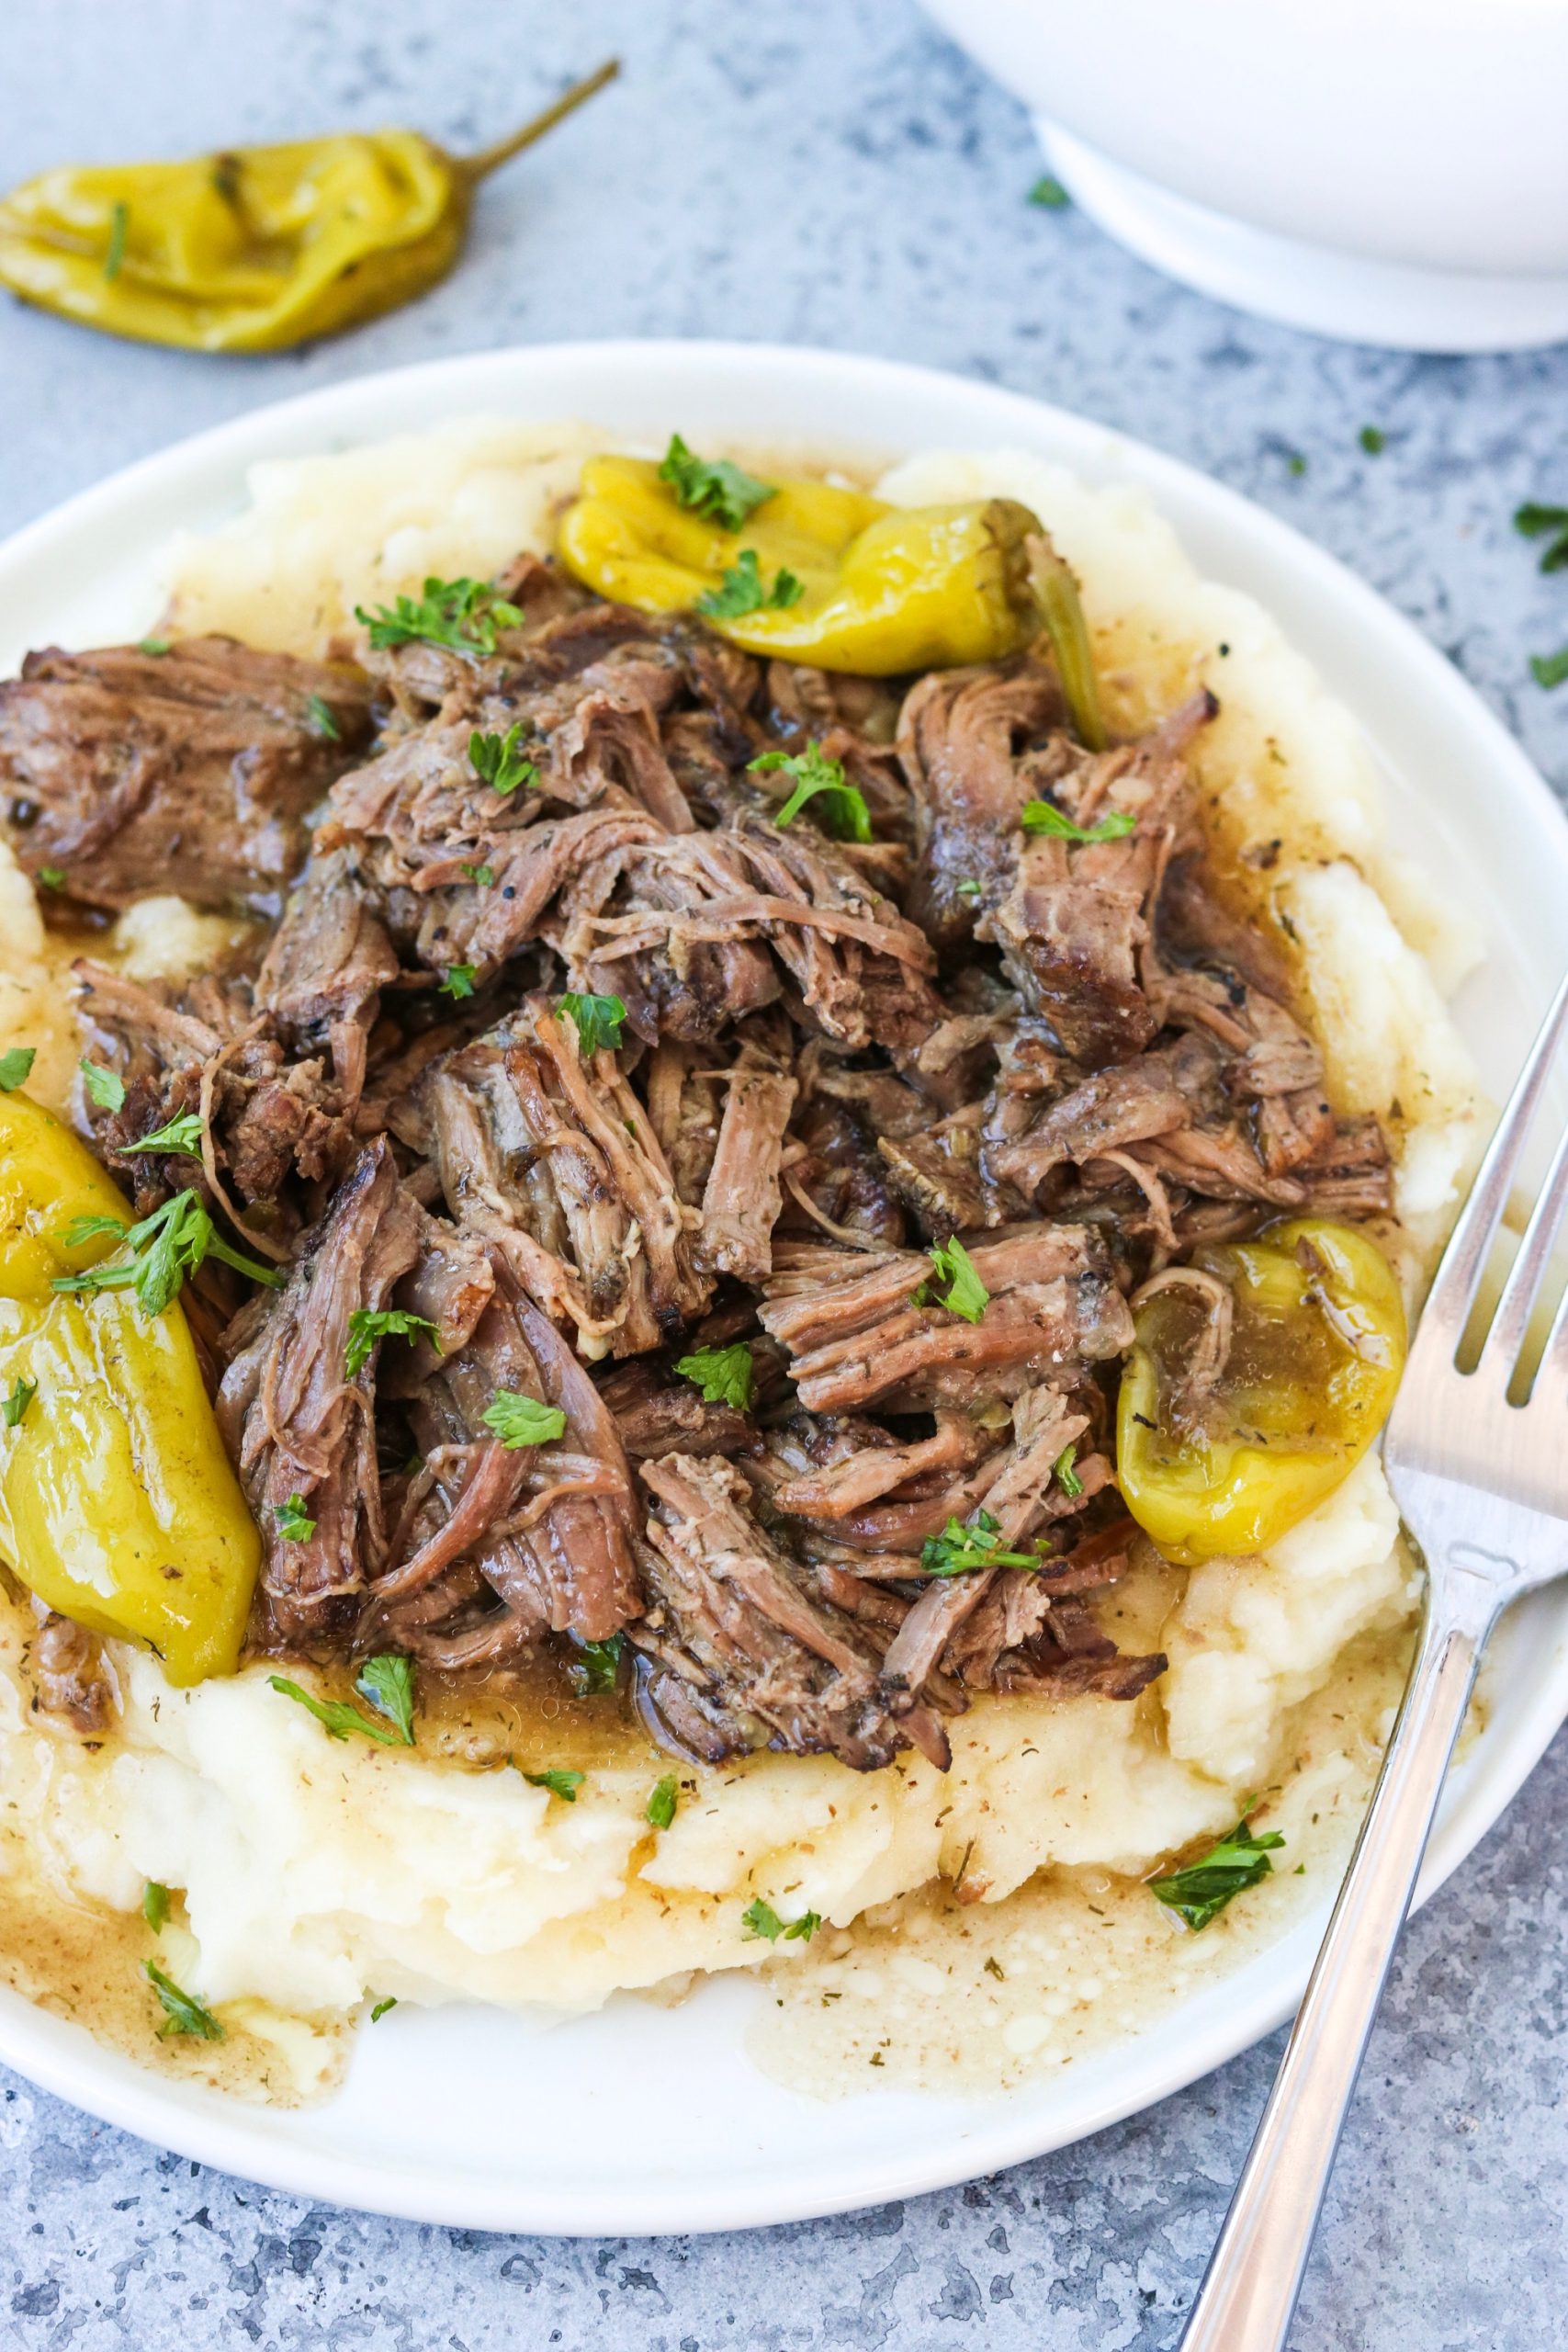 A healthier version of the classic spicy, flavorful beef dish made with au jus & ranch seasonings, butter, and pepperocinis!